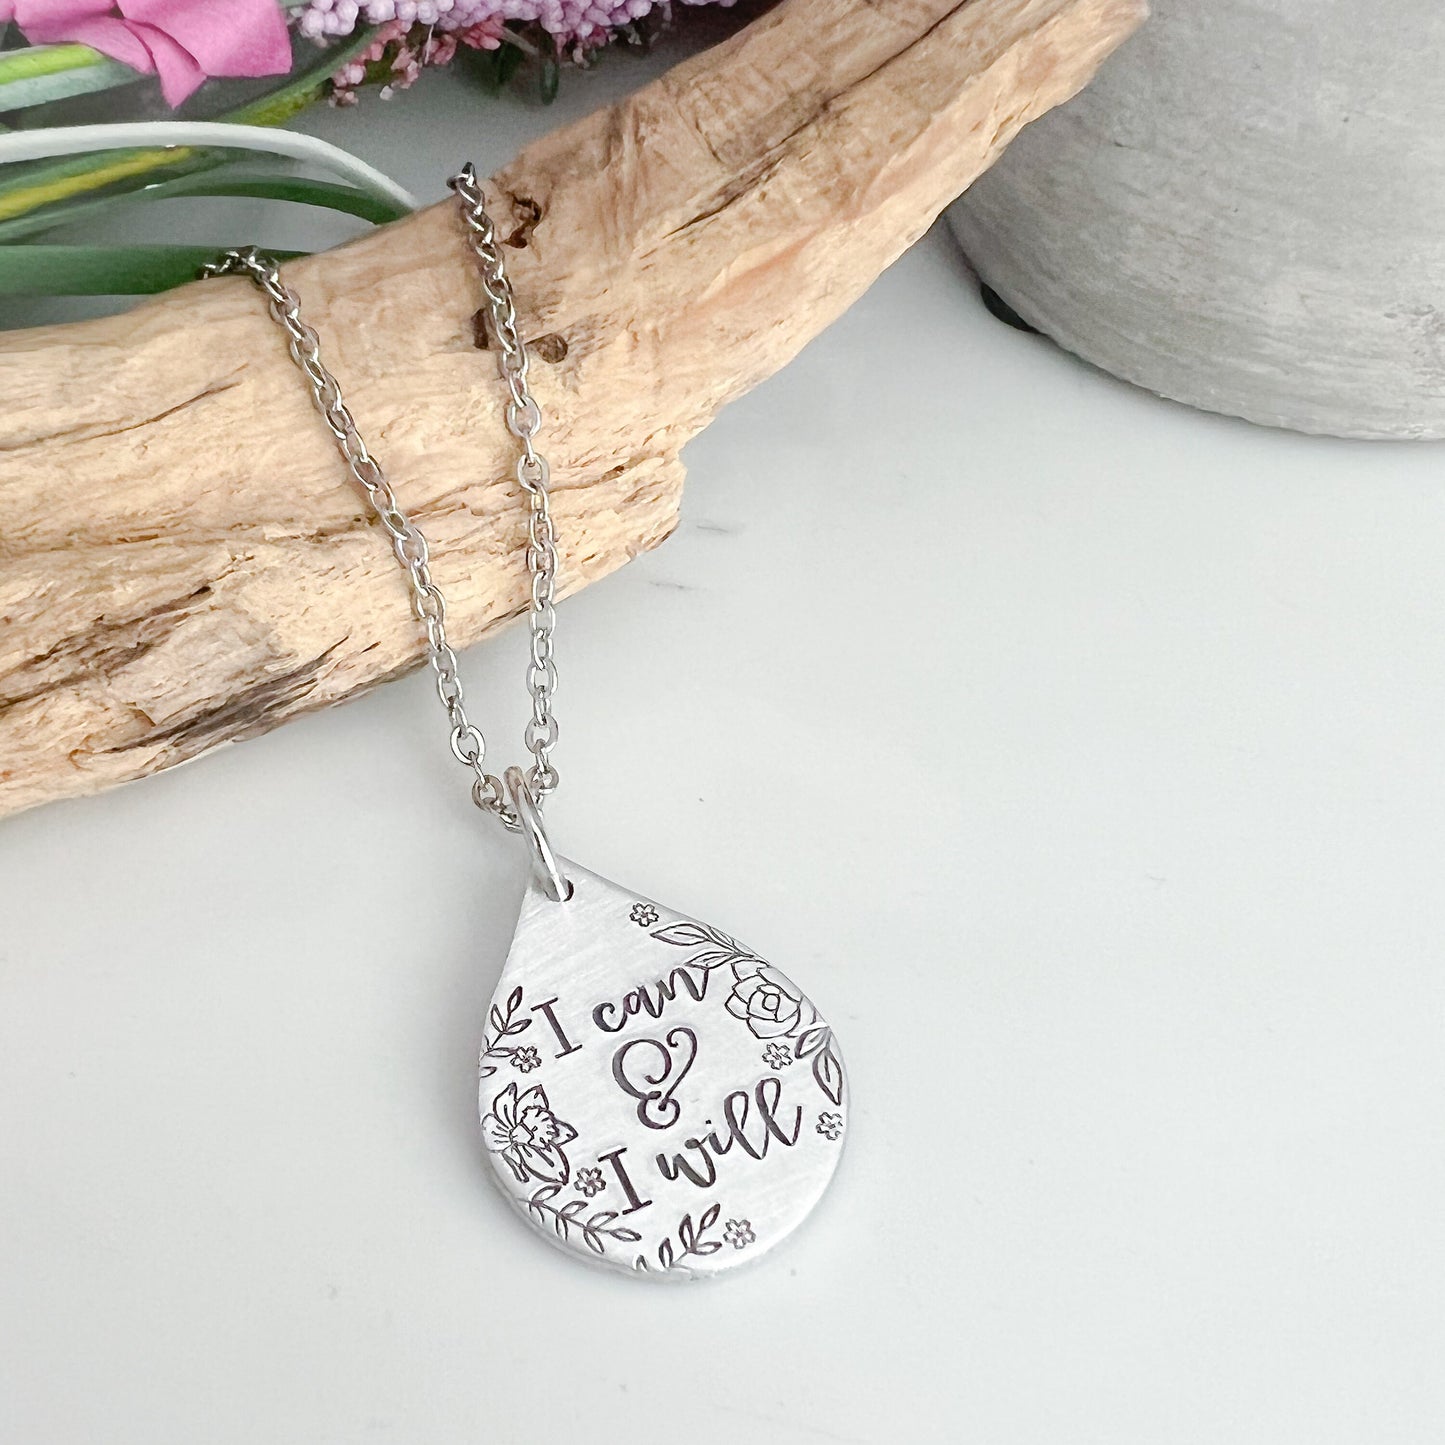 I can and I will necklace—motivational jewelry—inspirational necklace